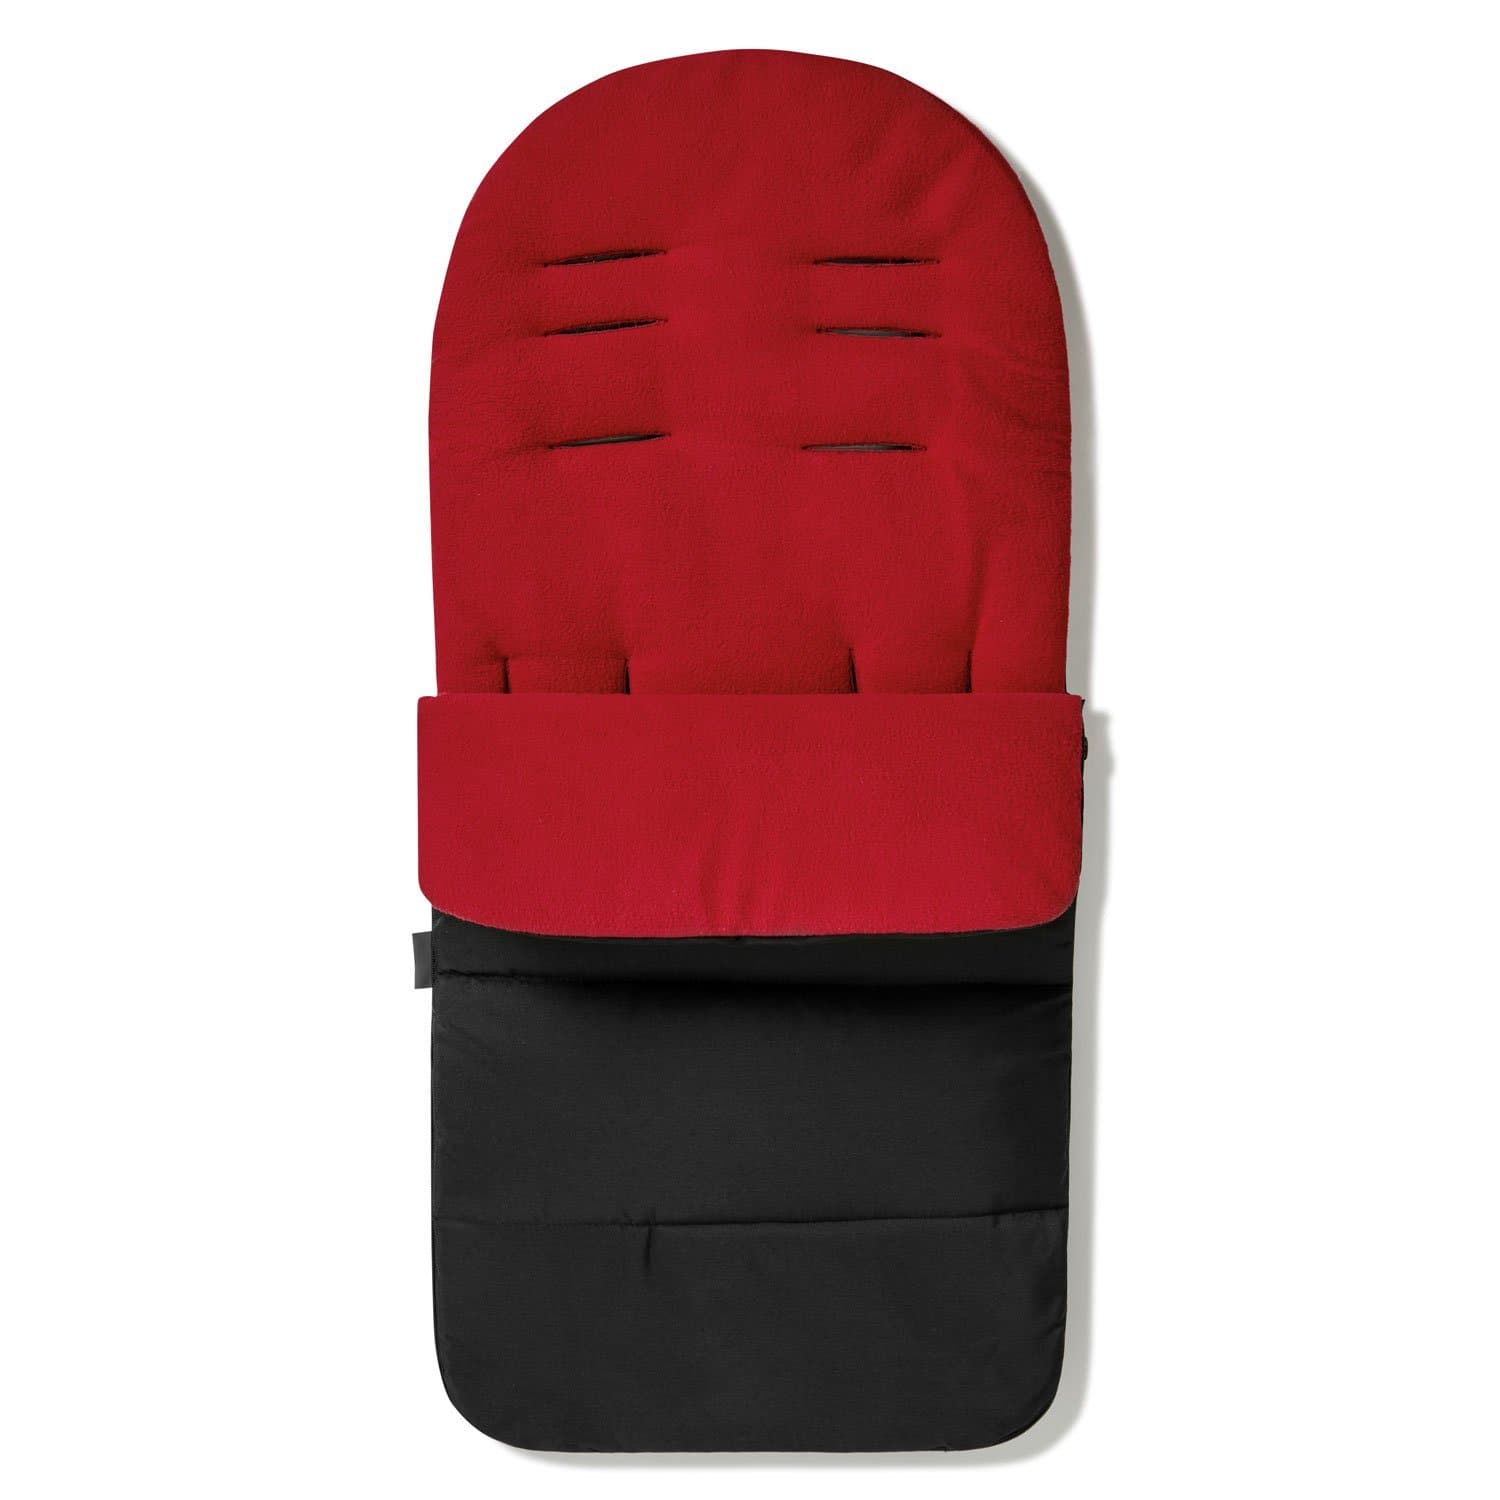 Premium Footmuff / Cosy Toes Compatible with Babybus - Fire Red / Fits All Models | For Your Little One